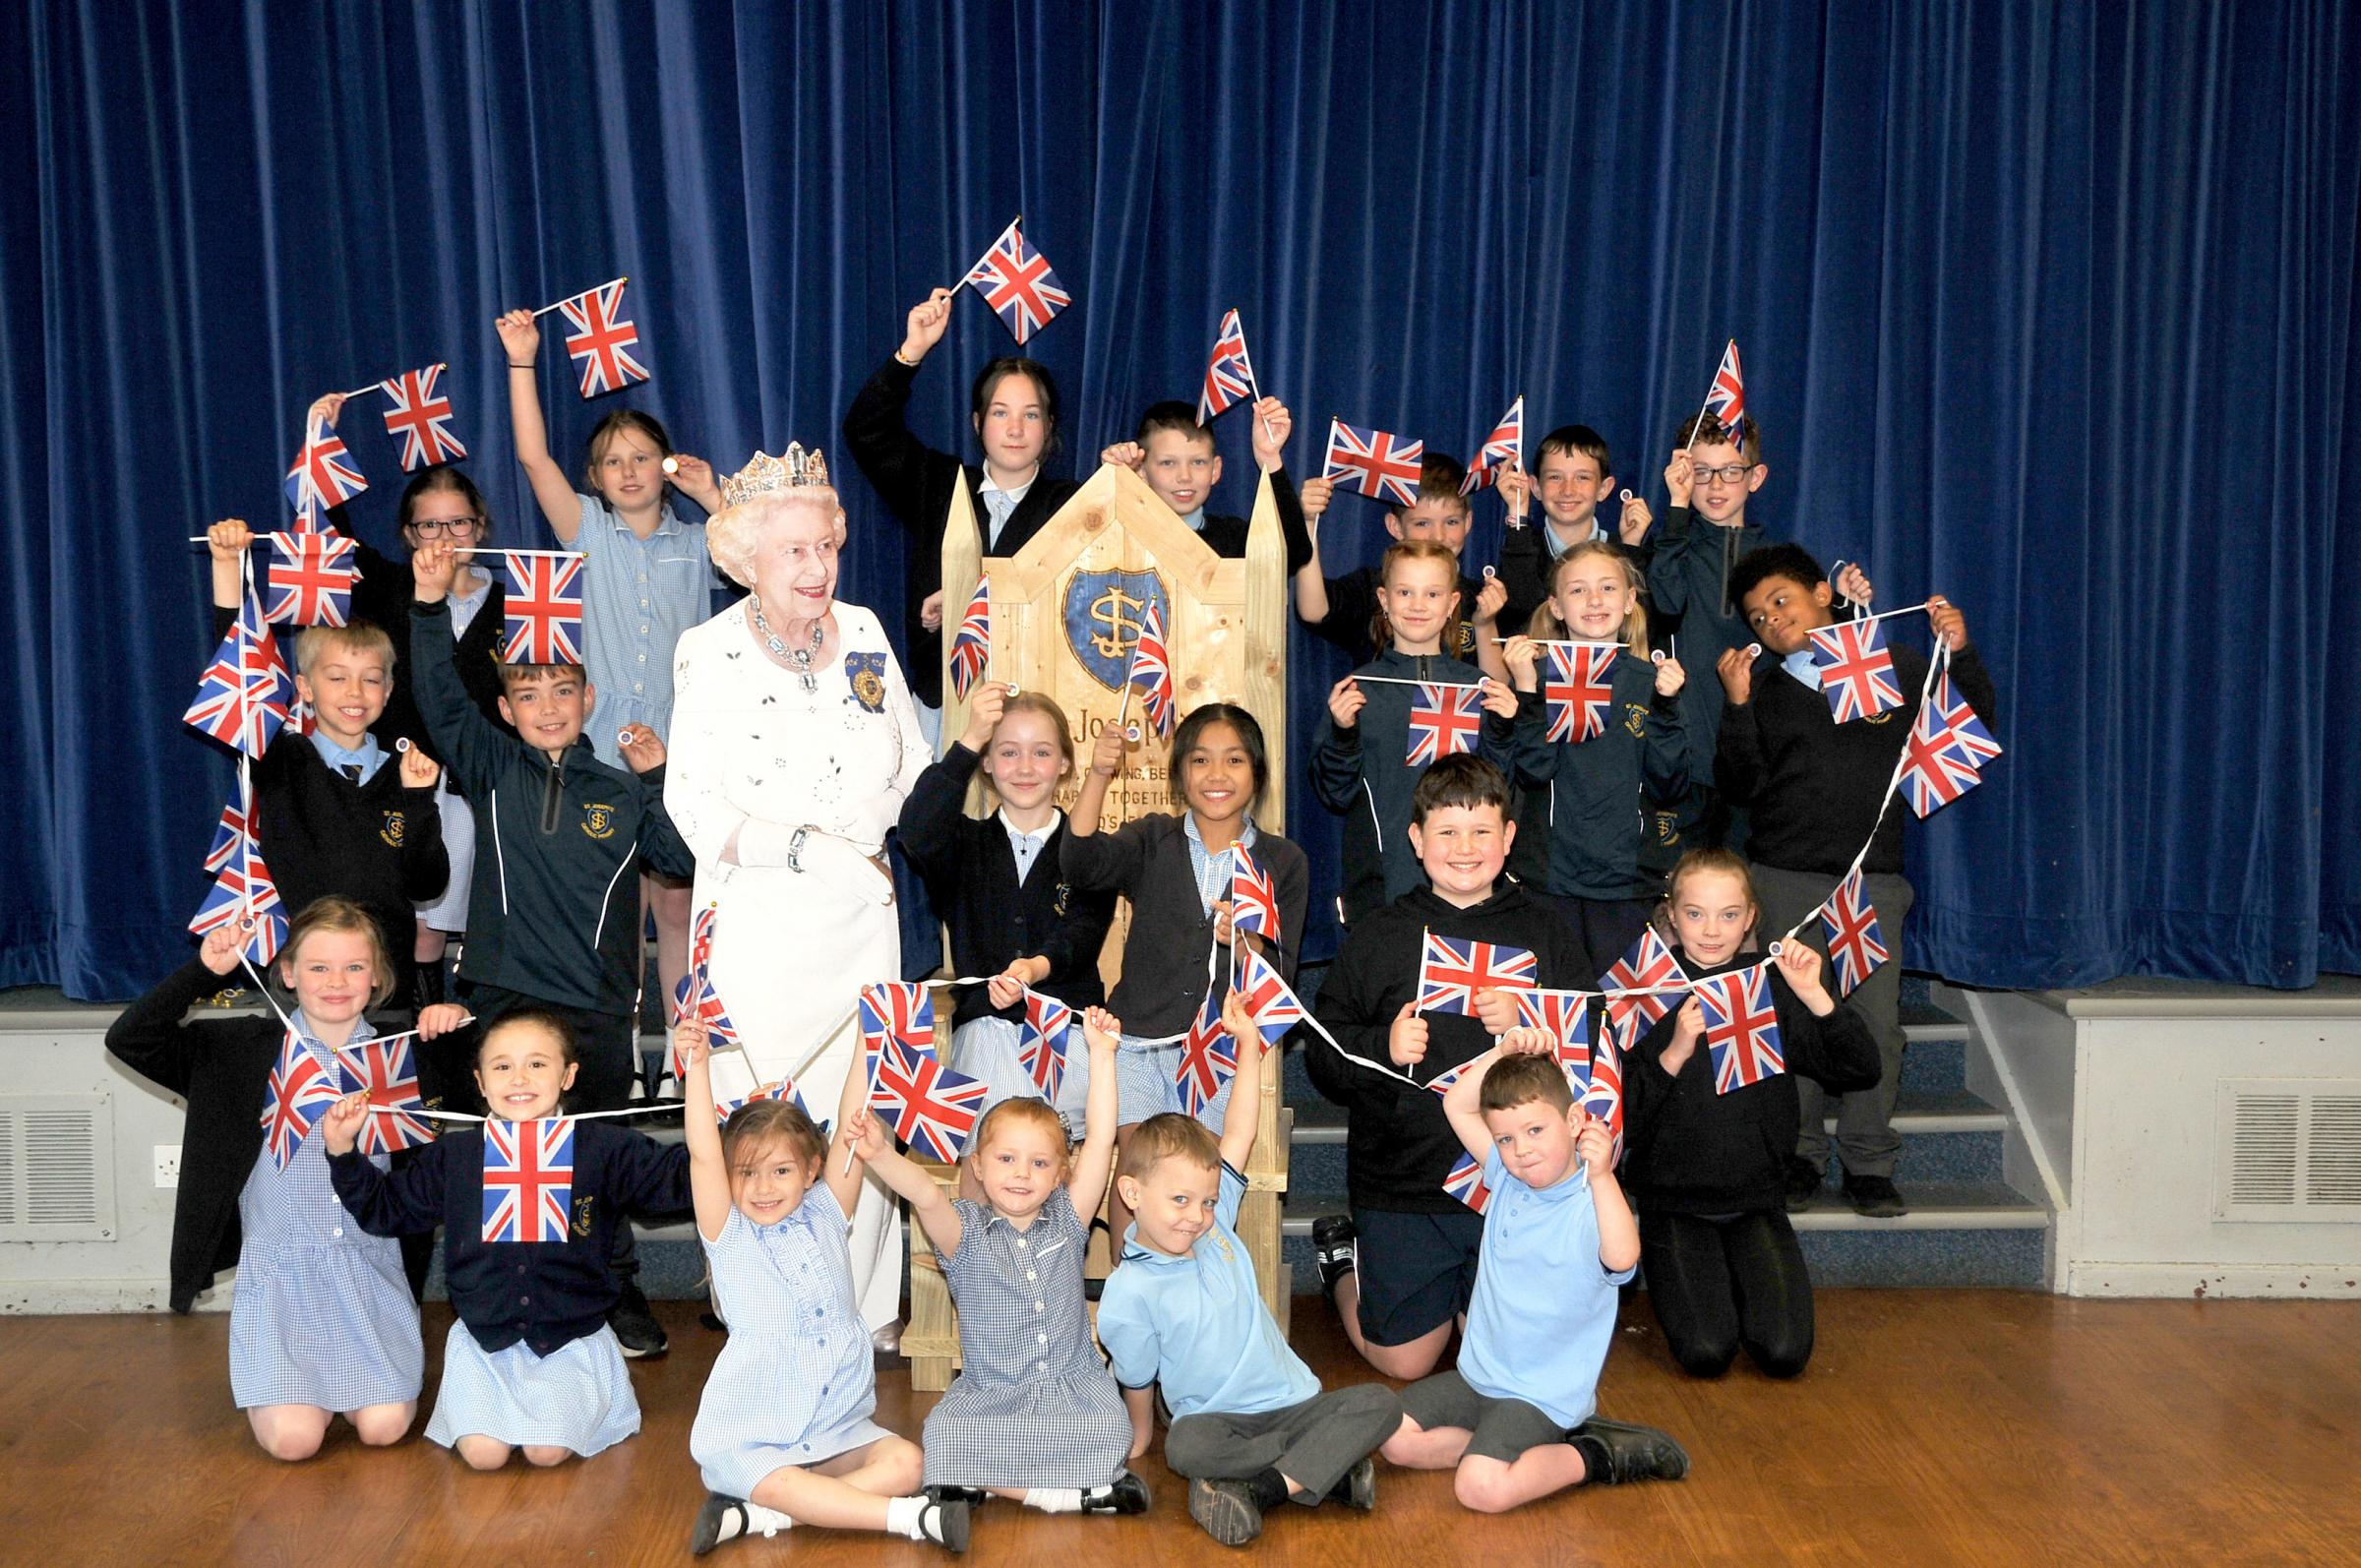 St Josephs Catholic Primary School pupils joined in with the Jubilee fun